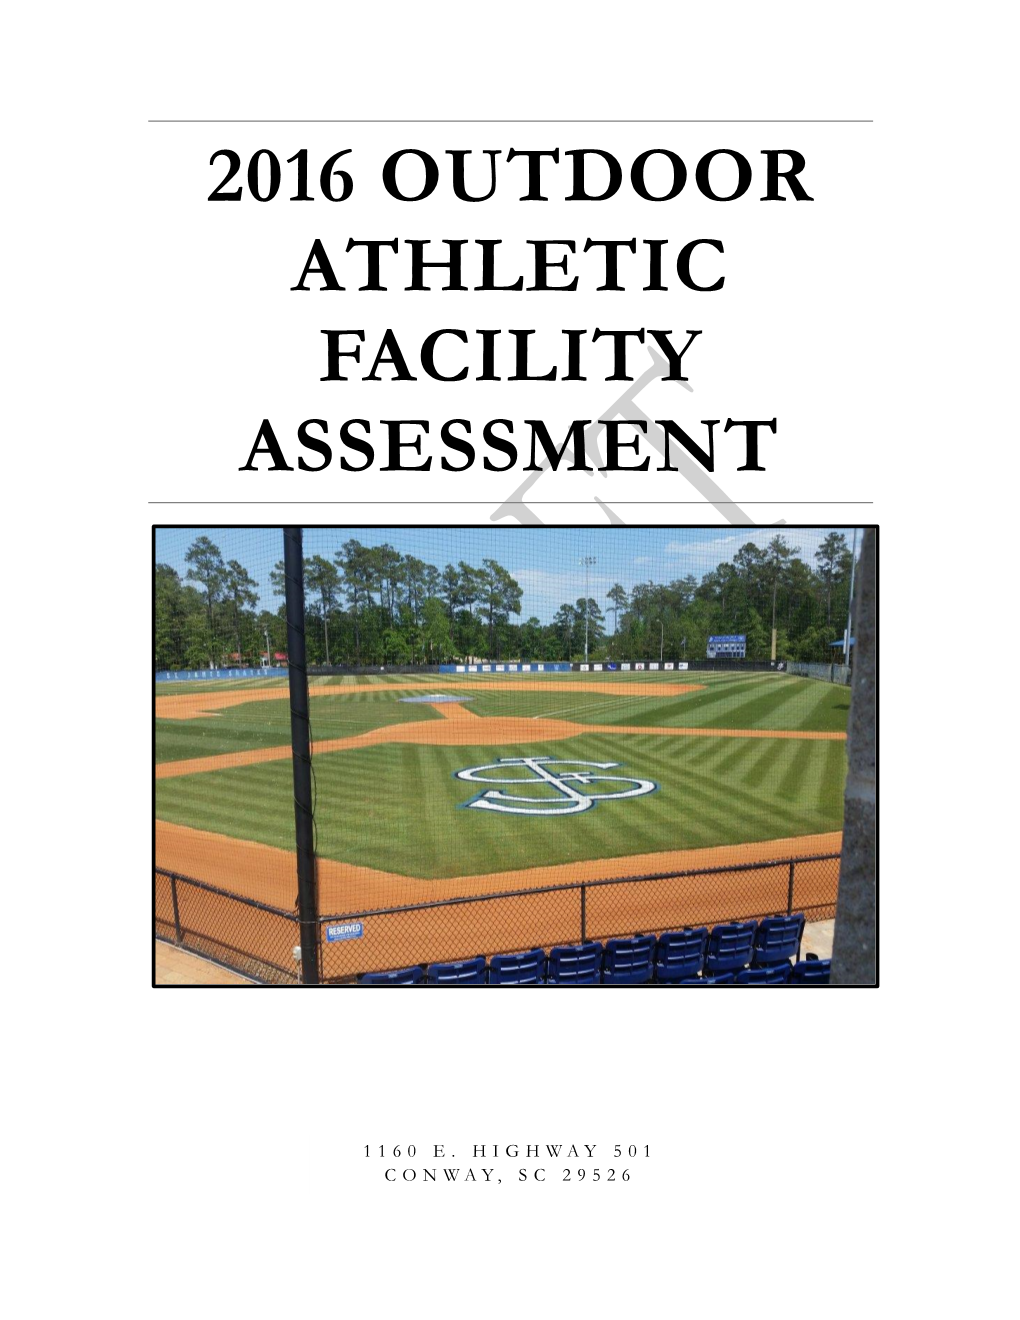 2016 Outdoor Athletic Facility Assessment